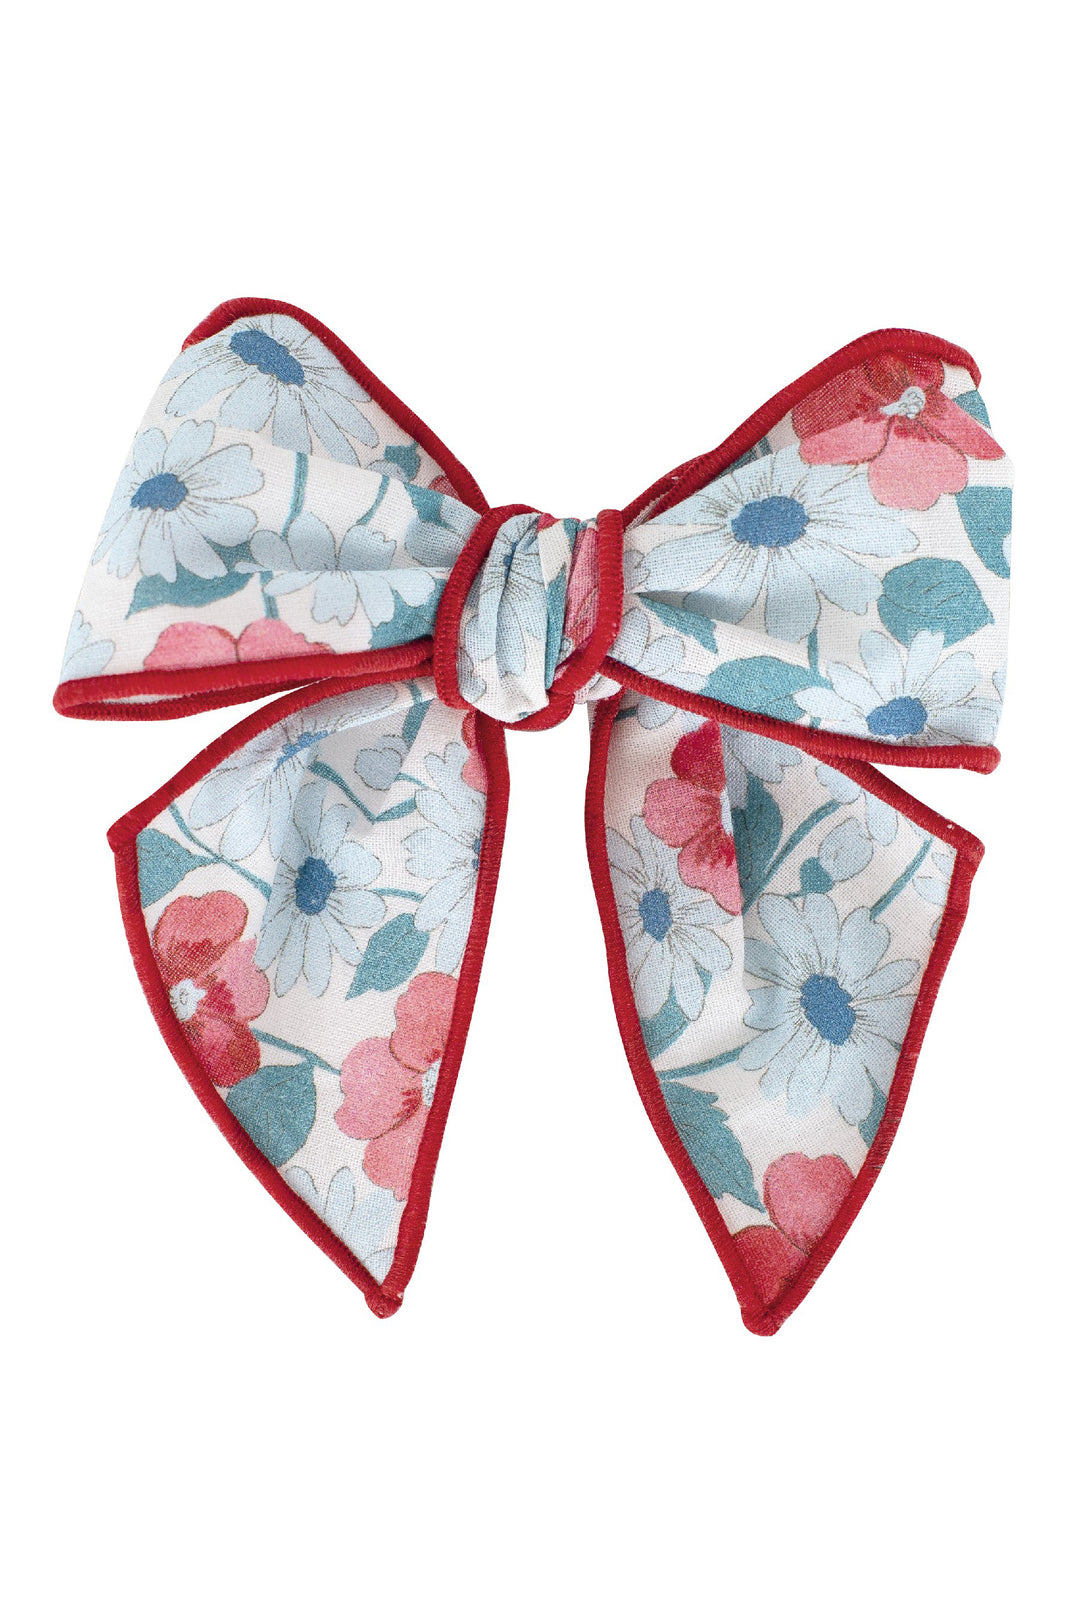 Calamaro Red & Blue Floral Hair Bow | iphoneandroidapplications